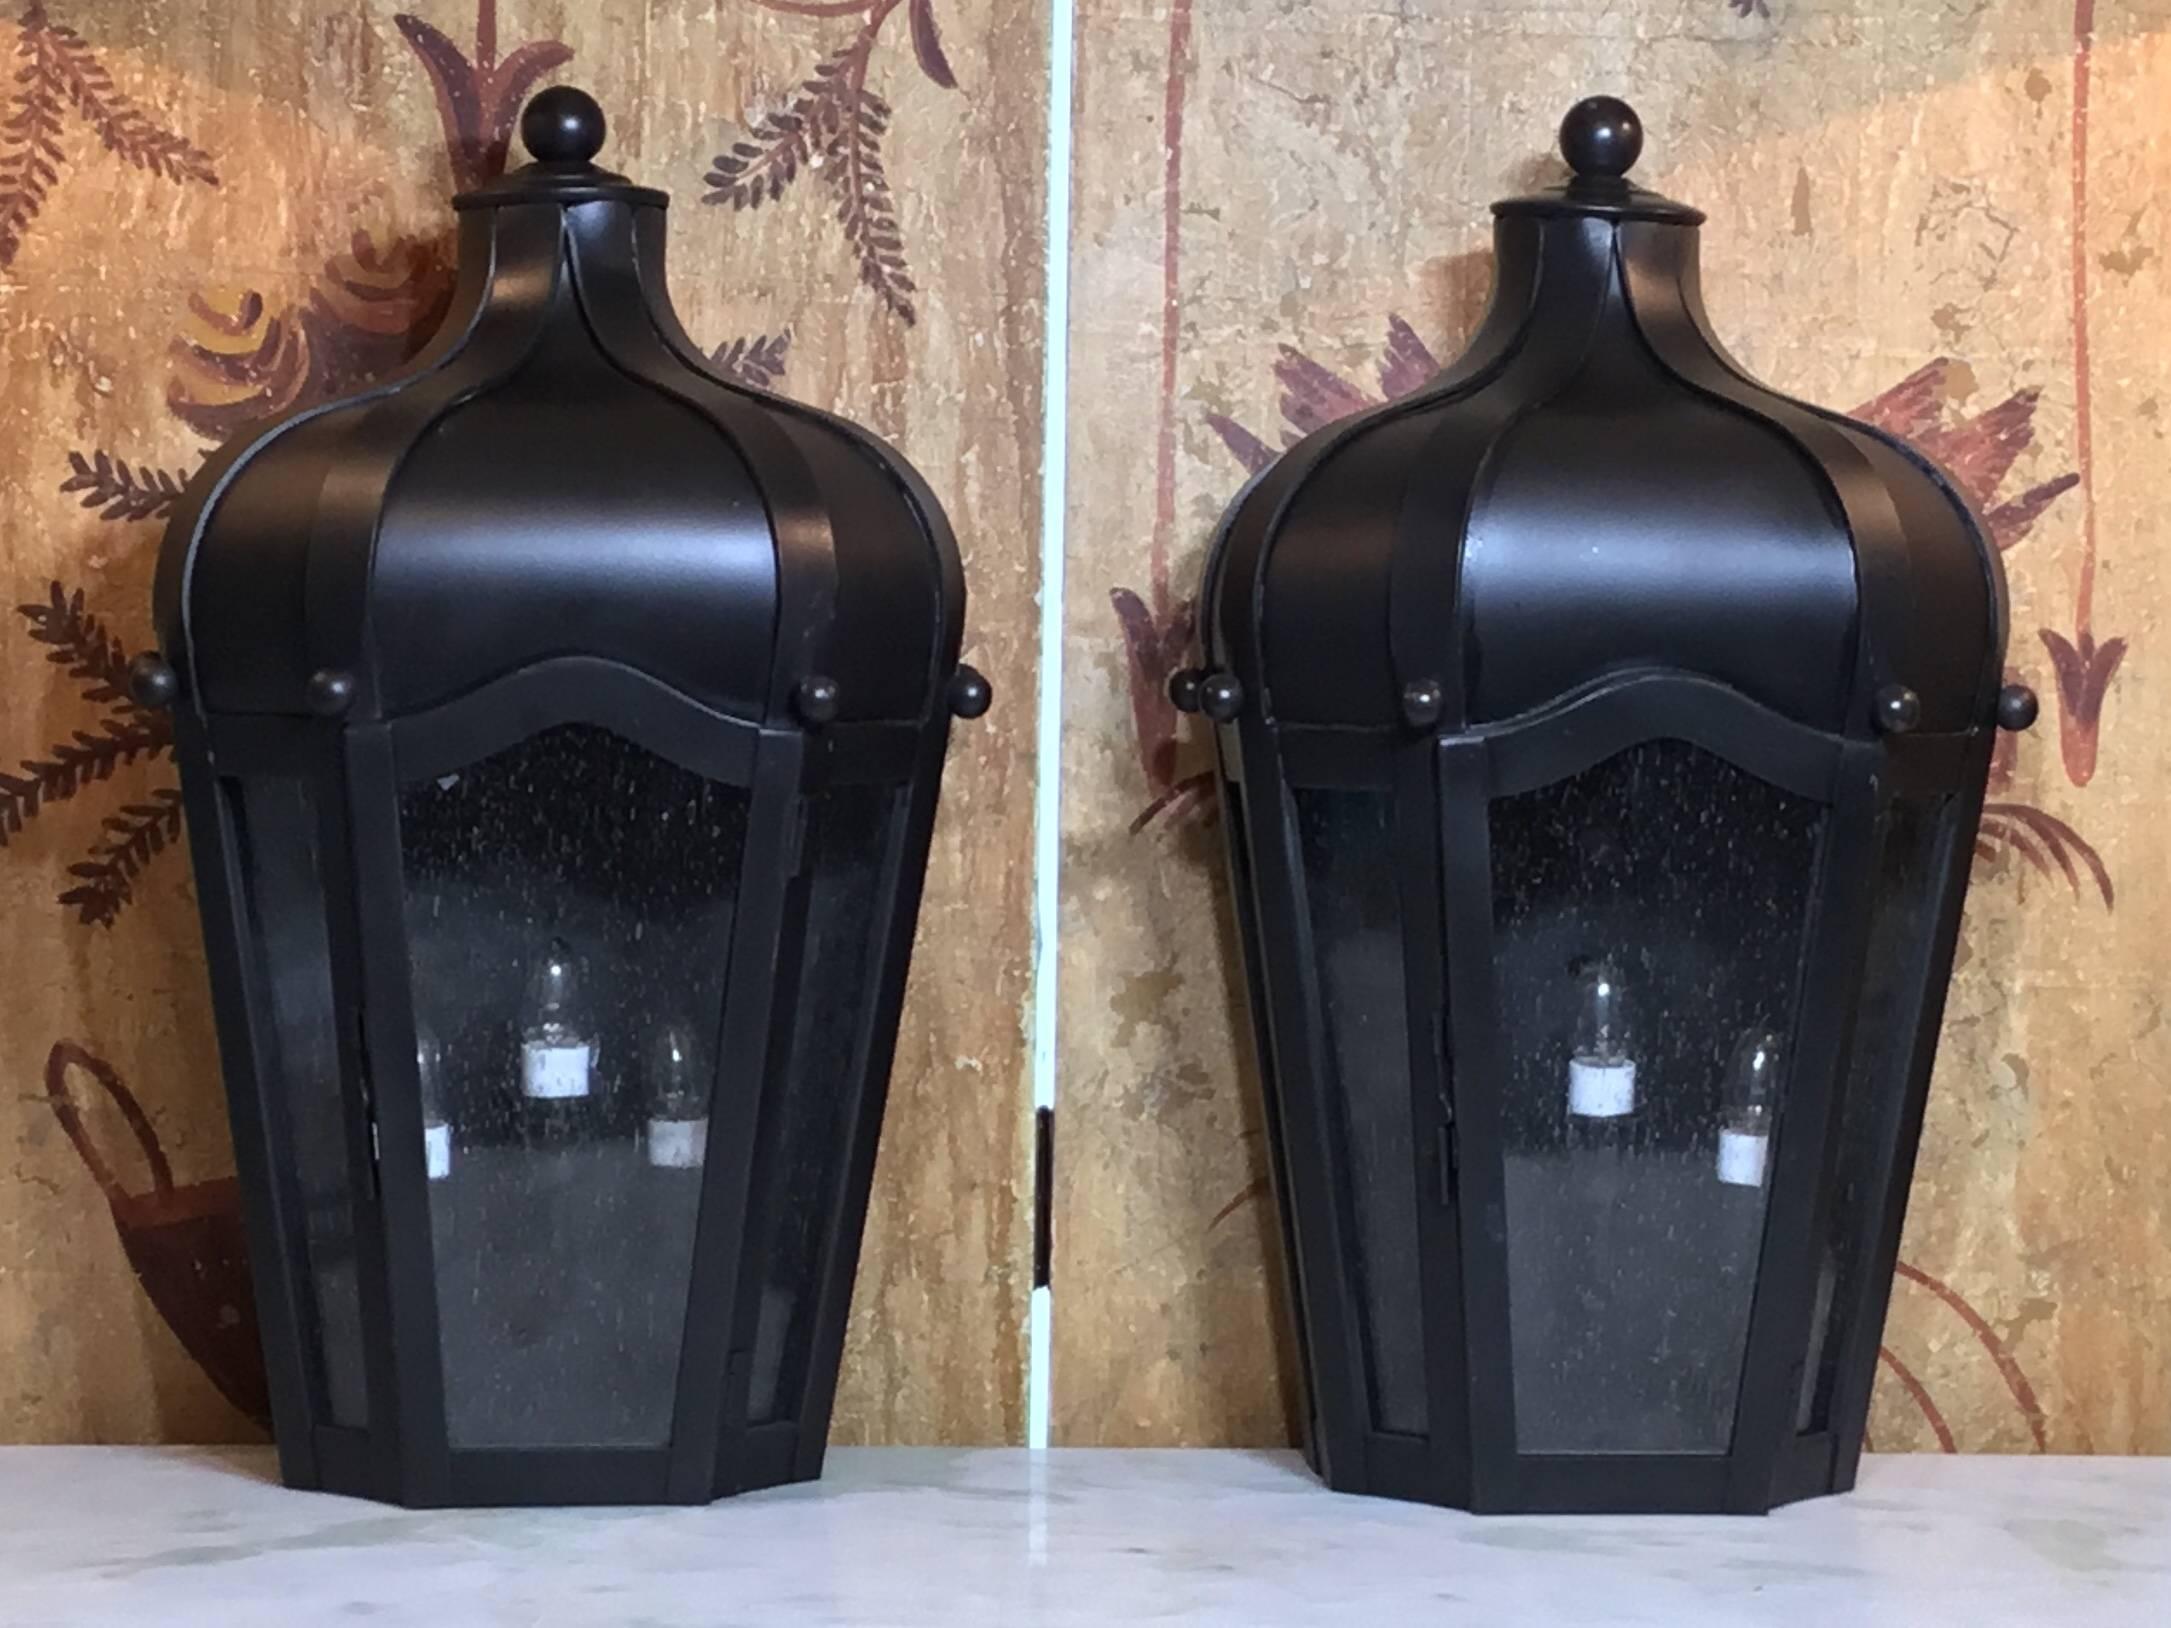 Pair of exceptional wall lanterns made of solid brass, seeded glass,
Electrified with three 40/watt lights each. Suitable for wet locations, UL approved, up to US code. Great decorative pair for indoor or outdoor.